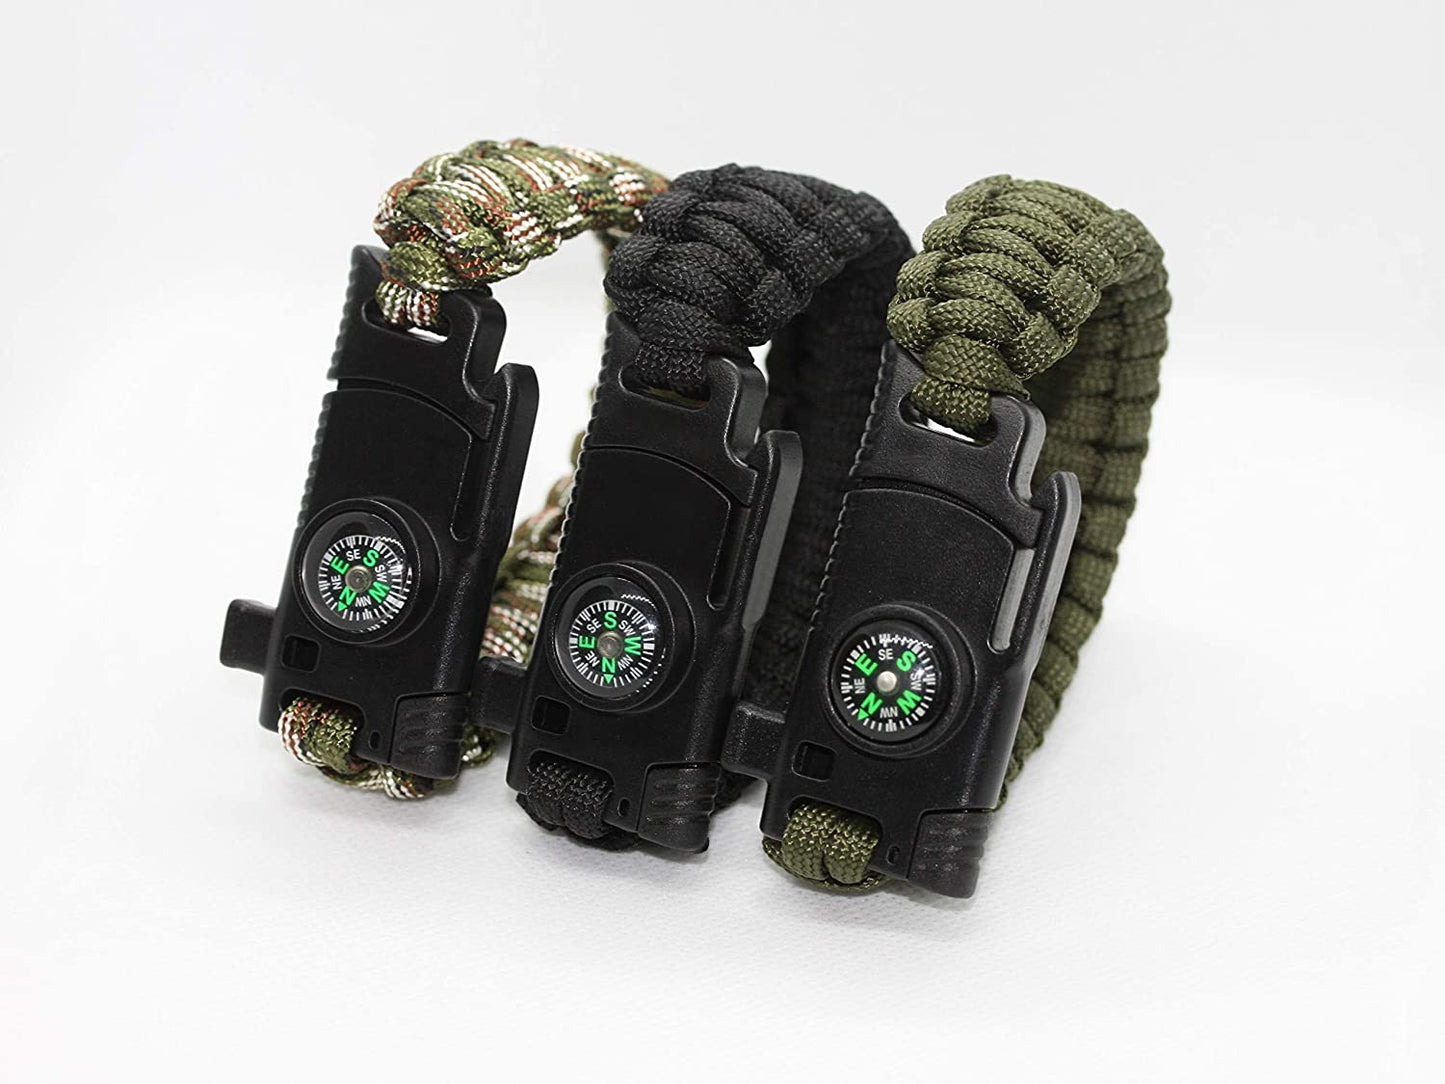 Multifunctional emergency bracelet with knife, signal whistle, compass and flint - survival bracelet - emergency bracelet - emergency orientation/emergency fire - outdoor bracelet - black